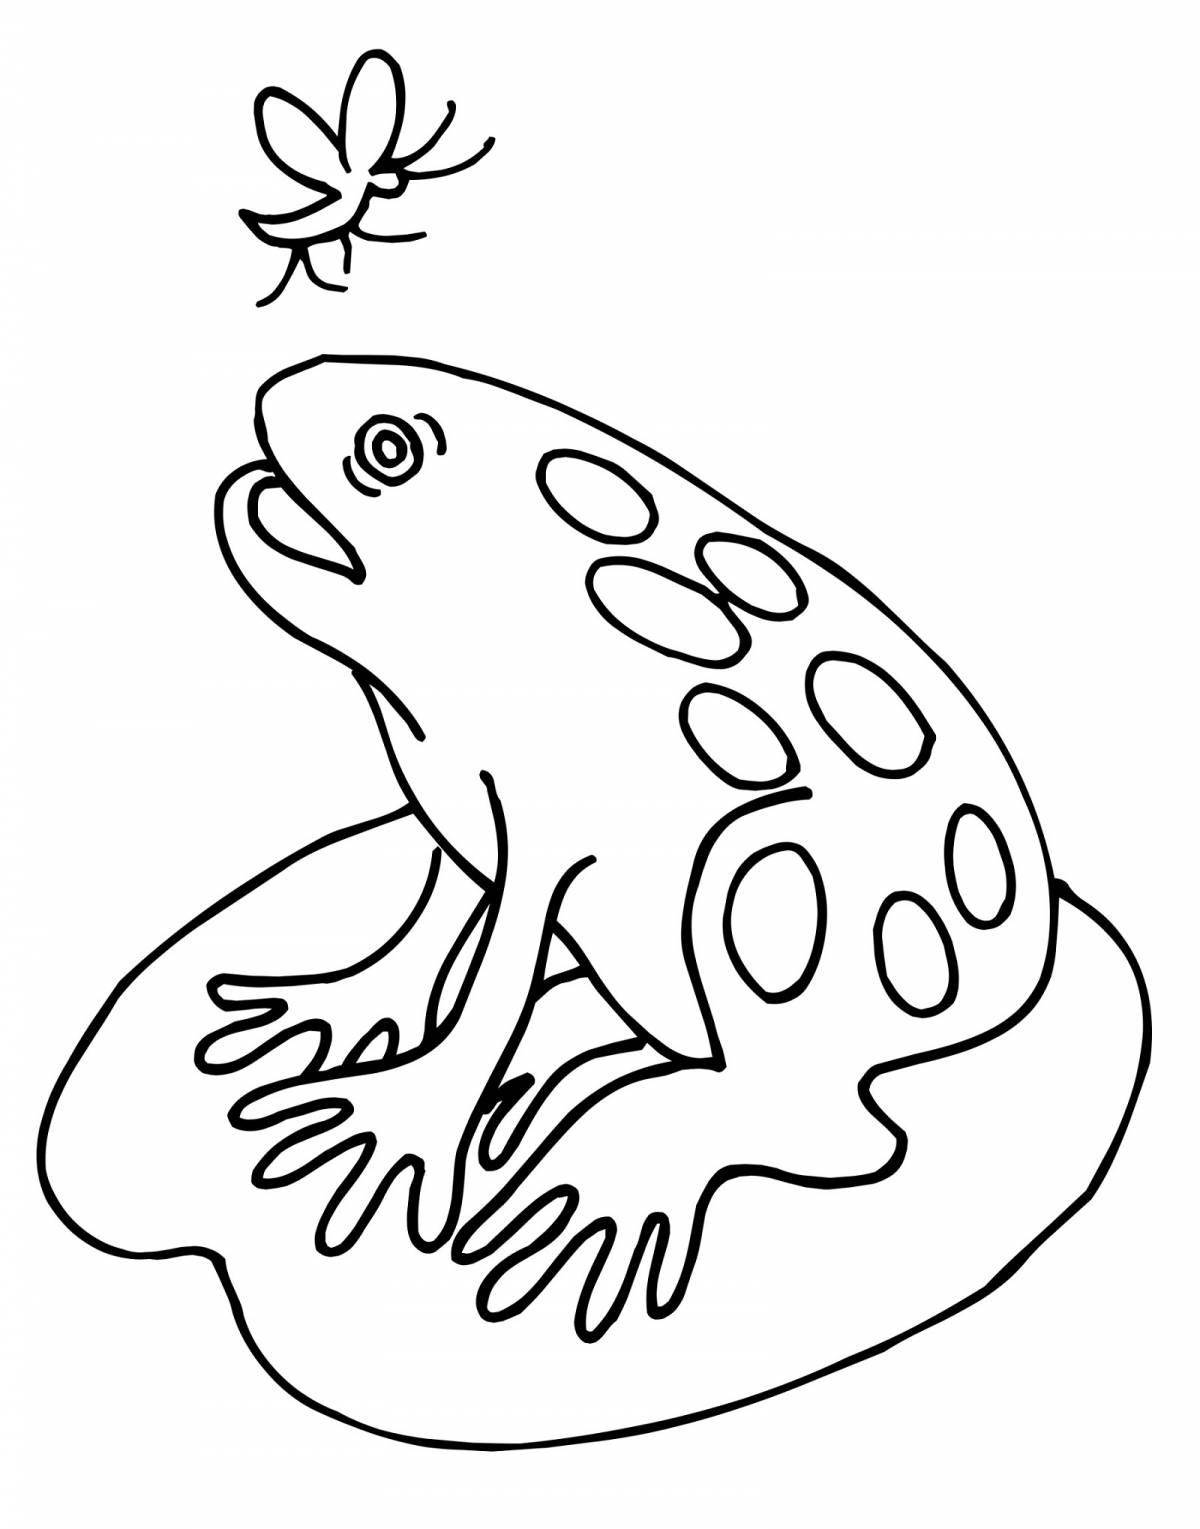 Fancy frog coloring book for 3-4 year olds